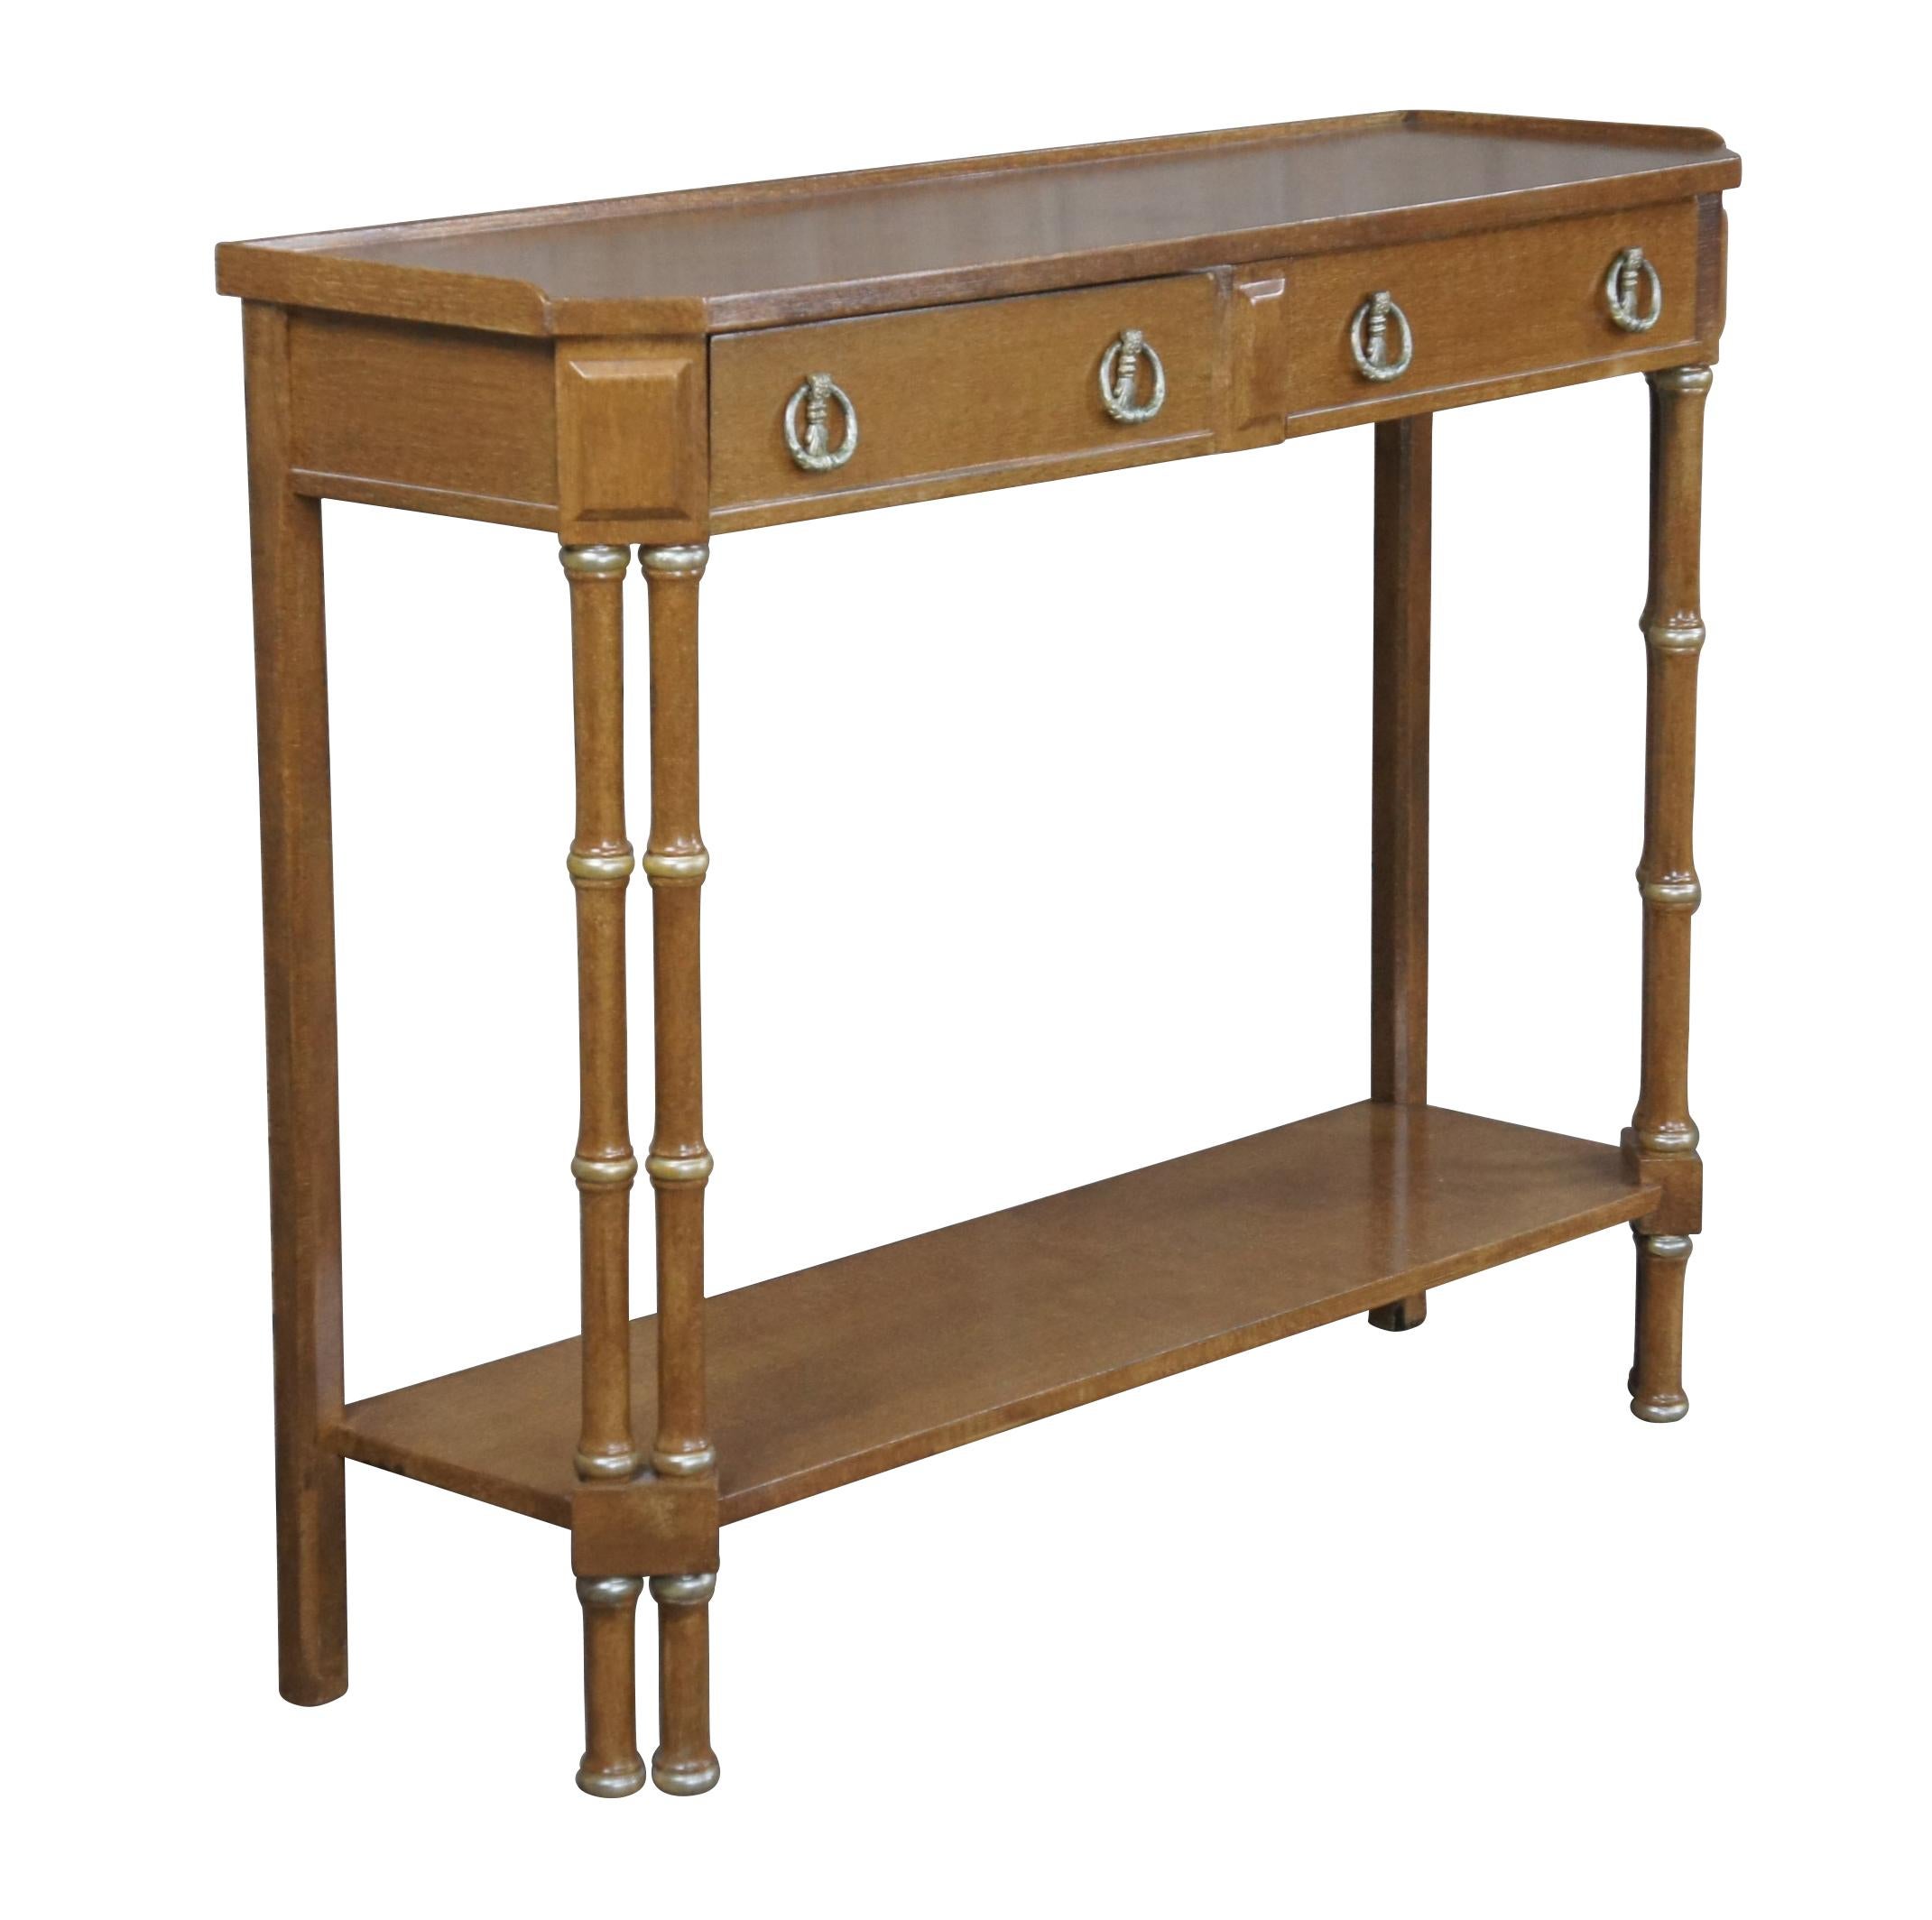 Vintage Campaign style tiered console or entry table featuring a slender profile with upper gallery over two drawers with Neoclassical brass hardware, supported by faux bamboo legs.

Dimensions:
36